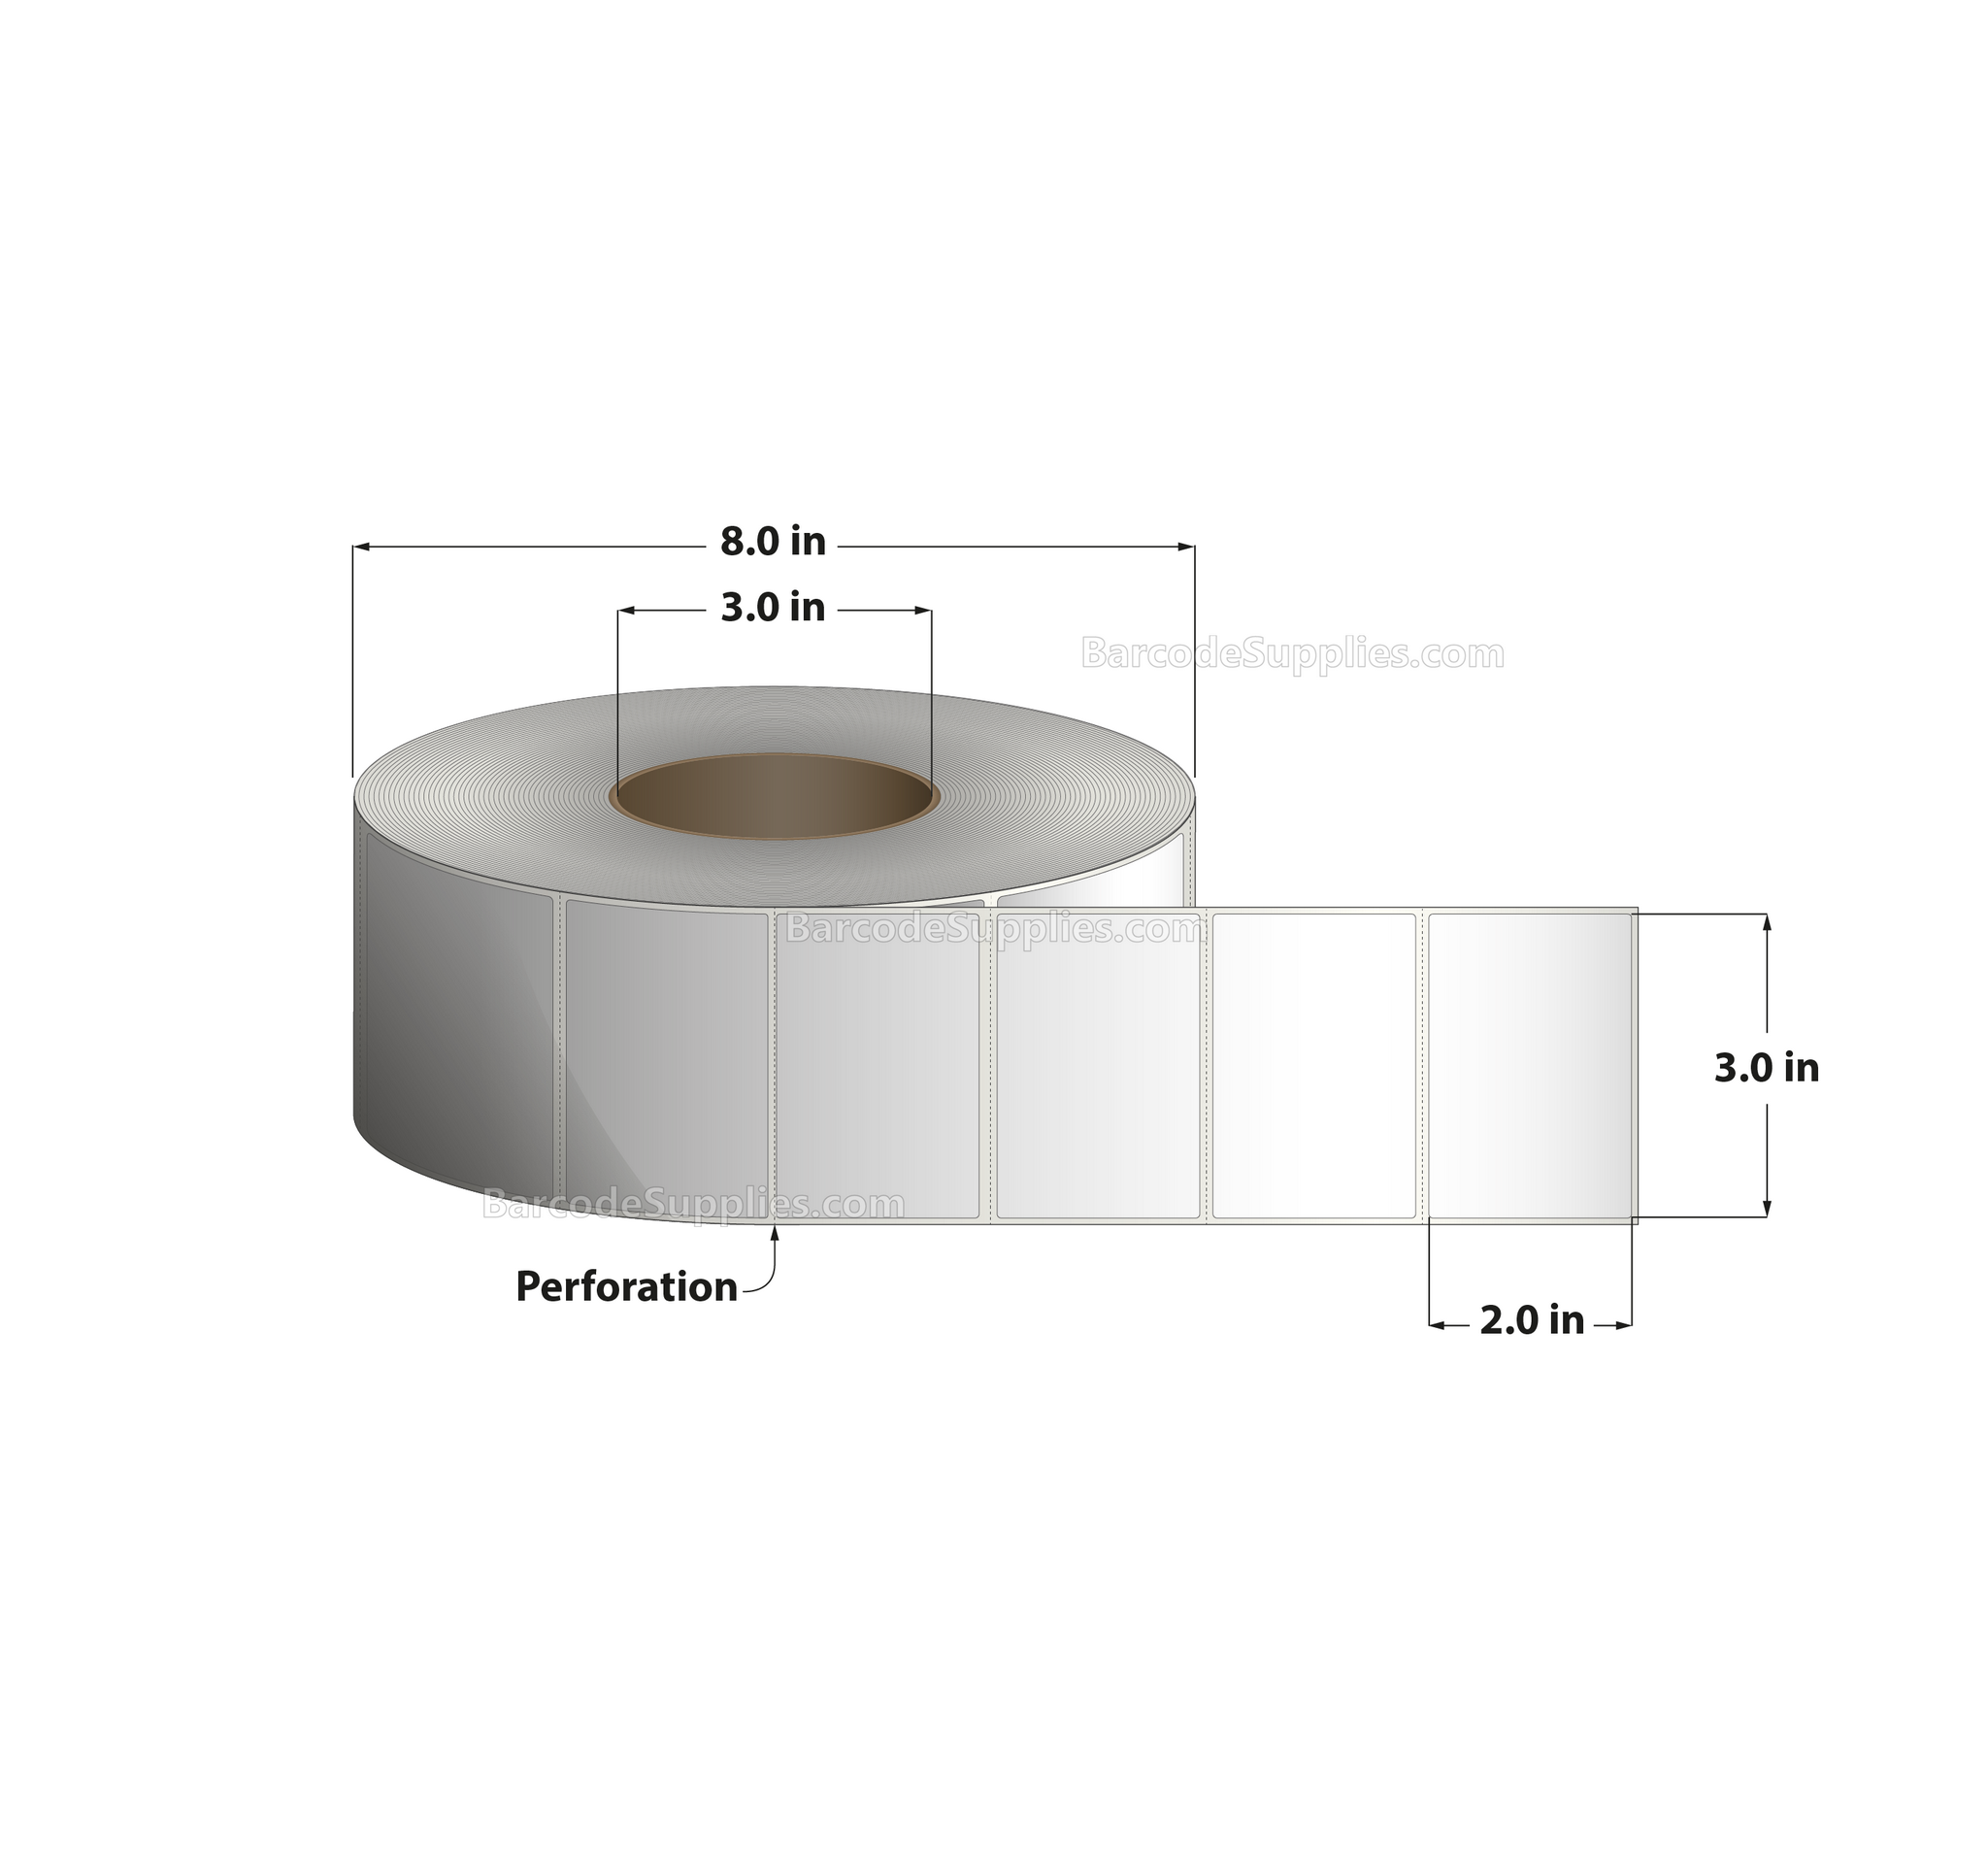 3 x 2 Direct Thermal White Labels With Permanent Acrylic Adhesive - Perforated - 2900 Labels Per Roll - Carton Of 8 Rolls - 23200 Labels Total - MPN: DT32-1P